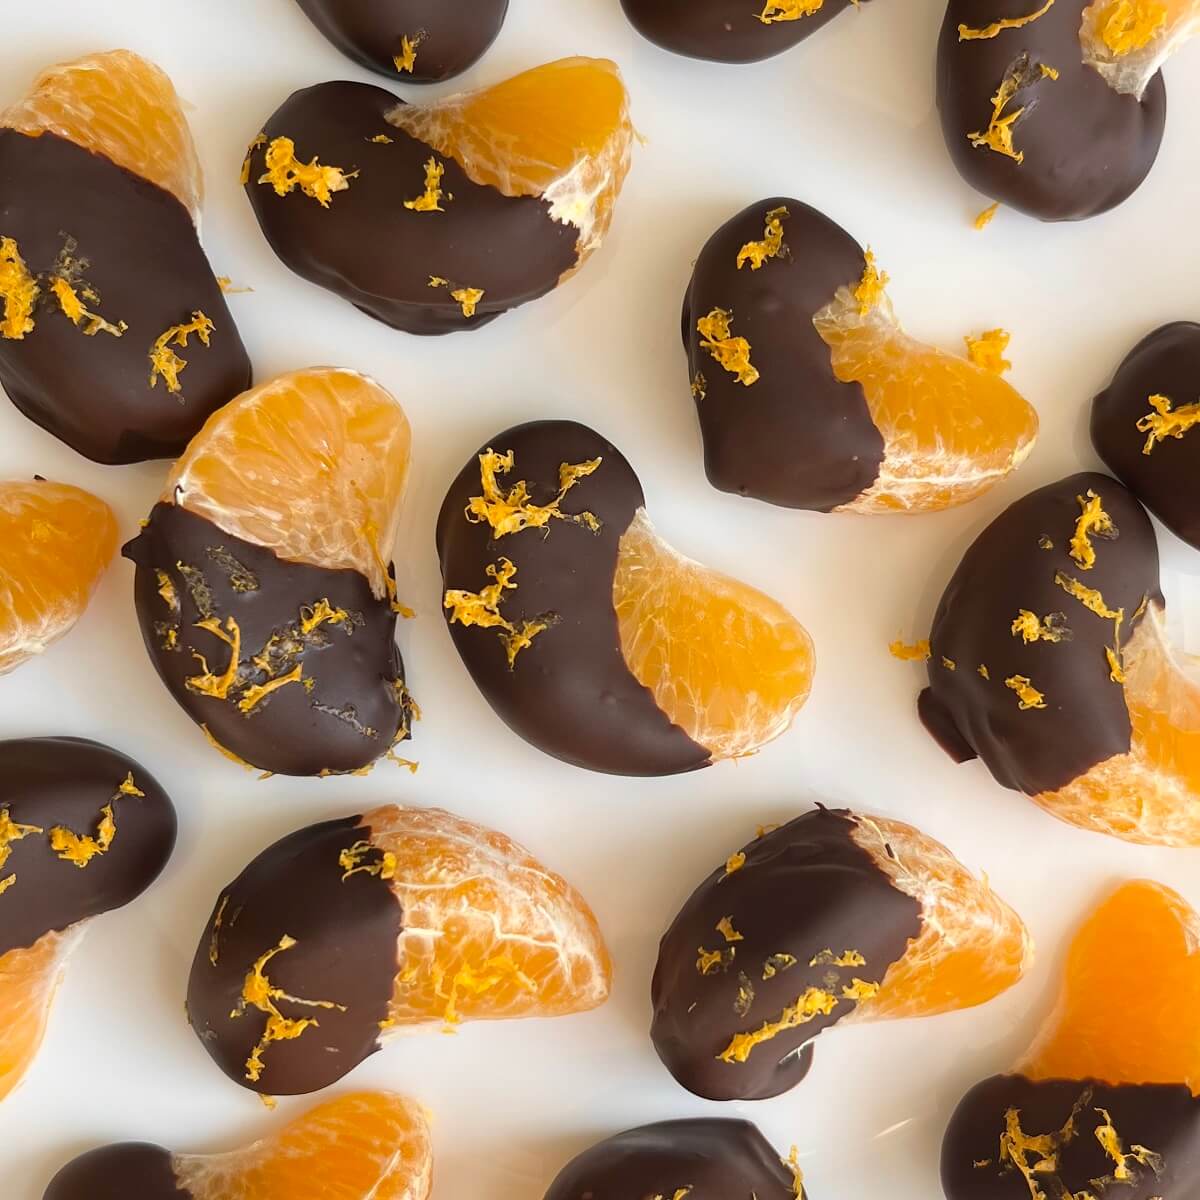 Chocolate dipped oranges sprinkled with orange zest on a white plate.